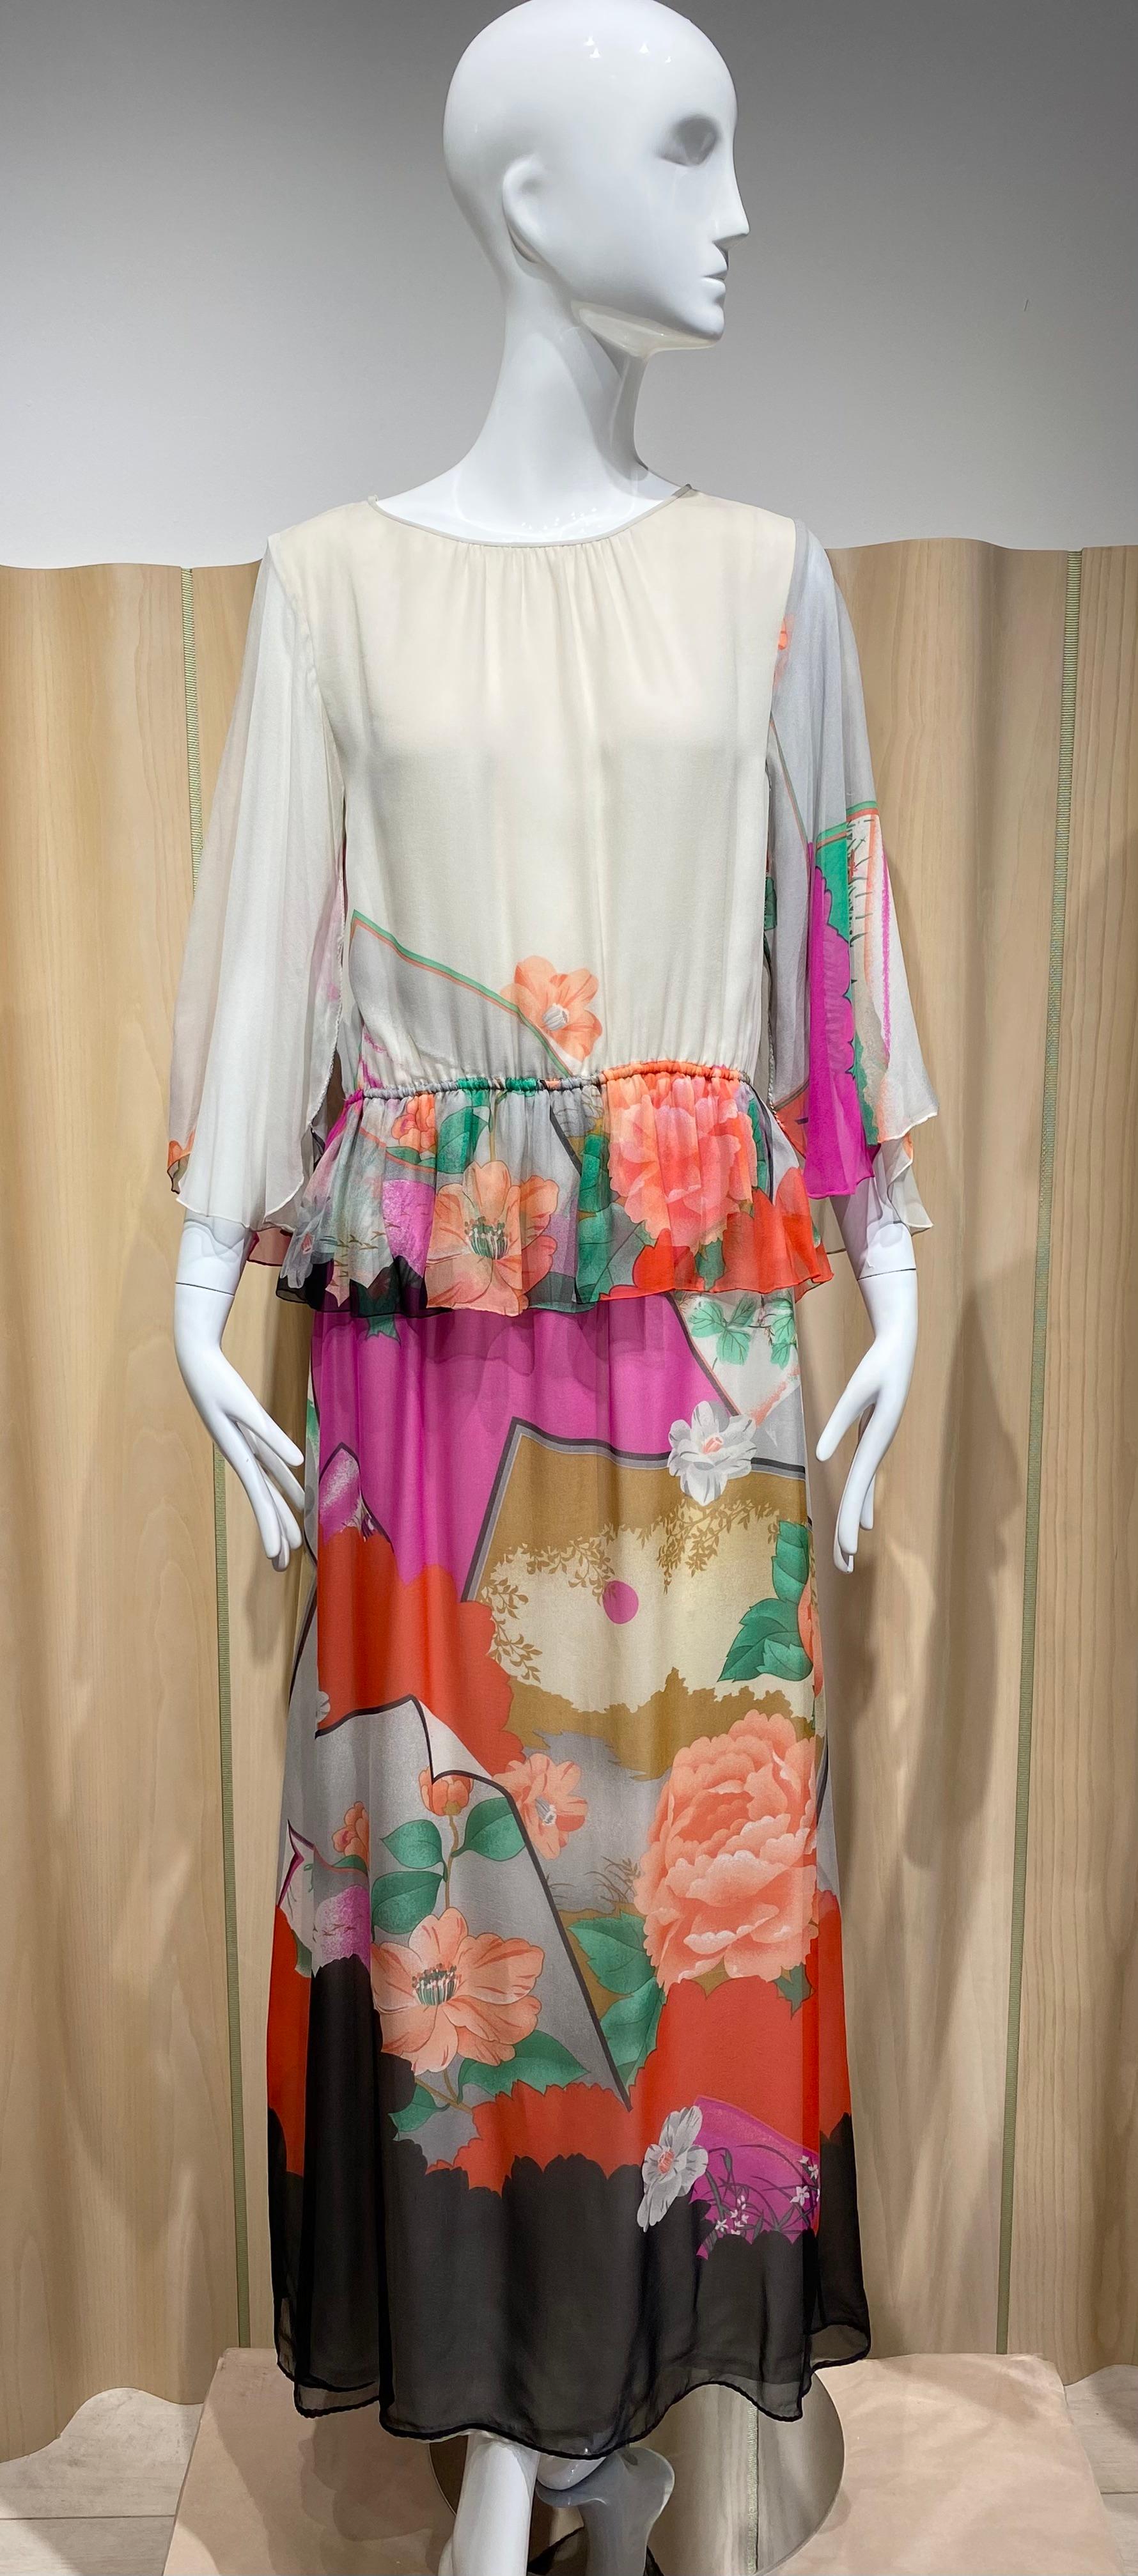 1970s Hanae Mori cream, pink, orange, green and pink floral print silk dress with orange silk sash/belt
-flutter sleeve
Size: Large
elastic waist
Bust 44 inches
Elastic waist stretch up to 34 inches